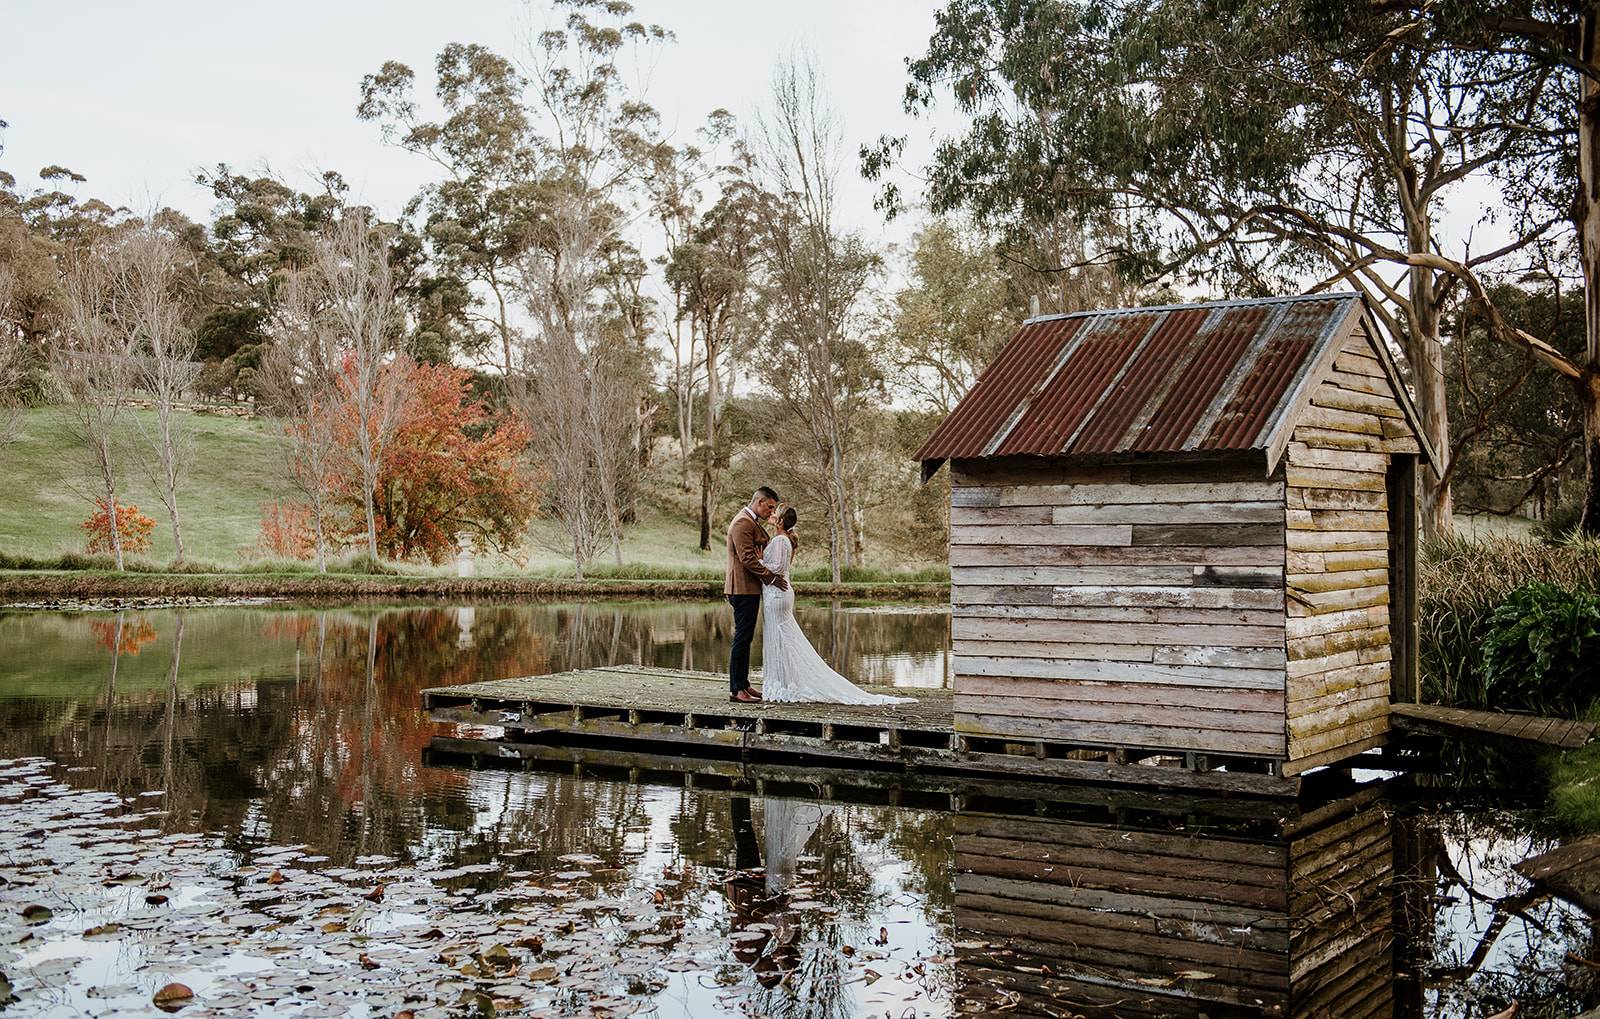 Couple sharing a tender moment on a rustic dock by a tranquil pond, with a quaint wooden hut and reflection in the water